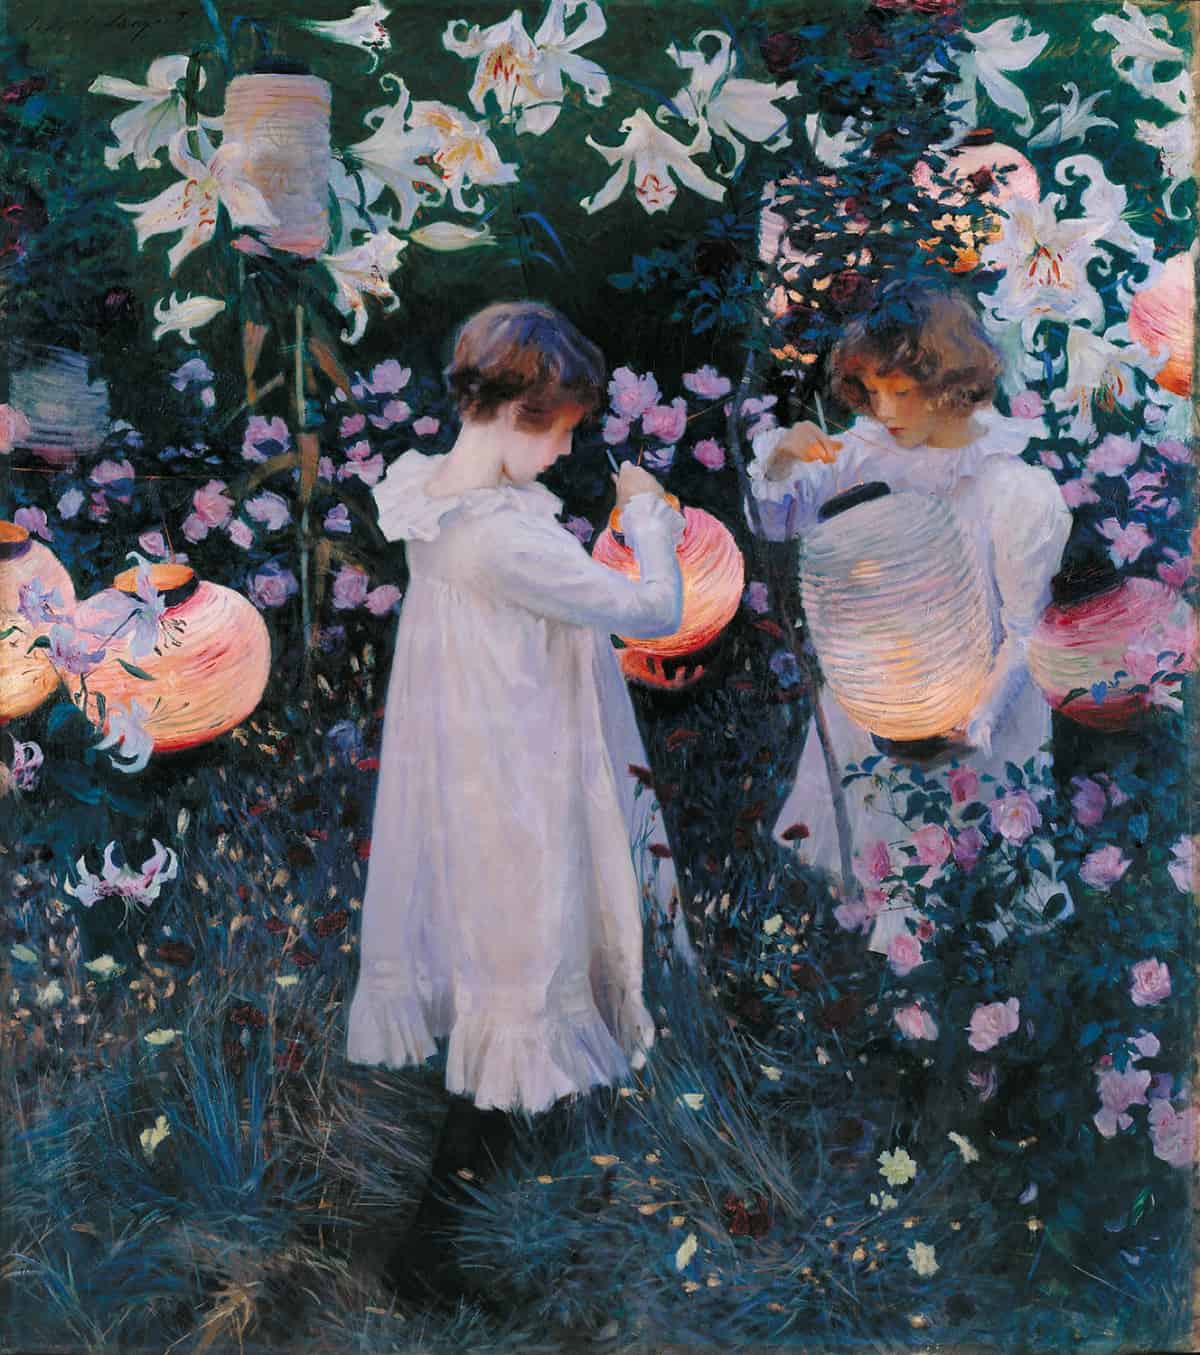 Painting by John Singer Sargent showing a floral garden, where two young girls hold paper lanterns